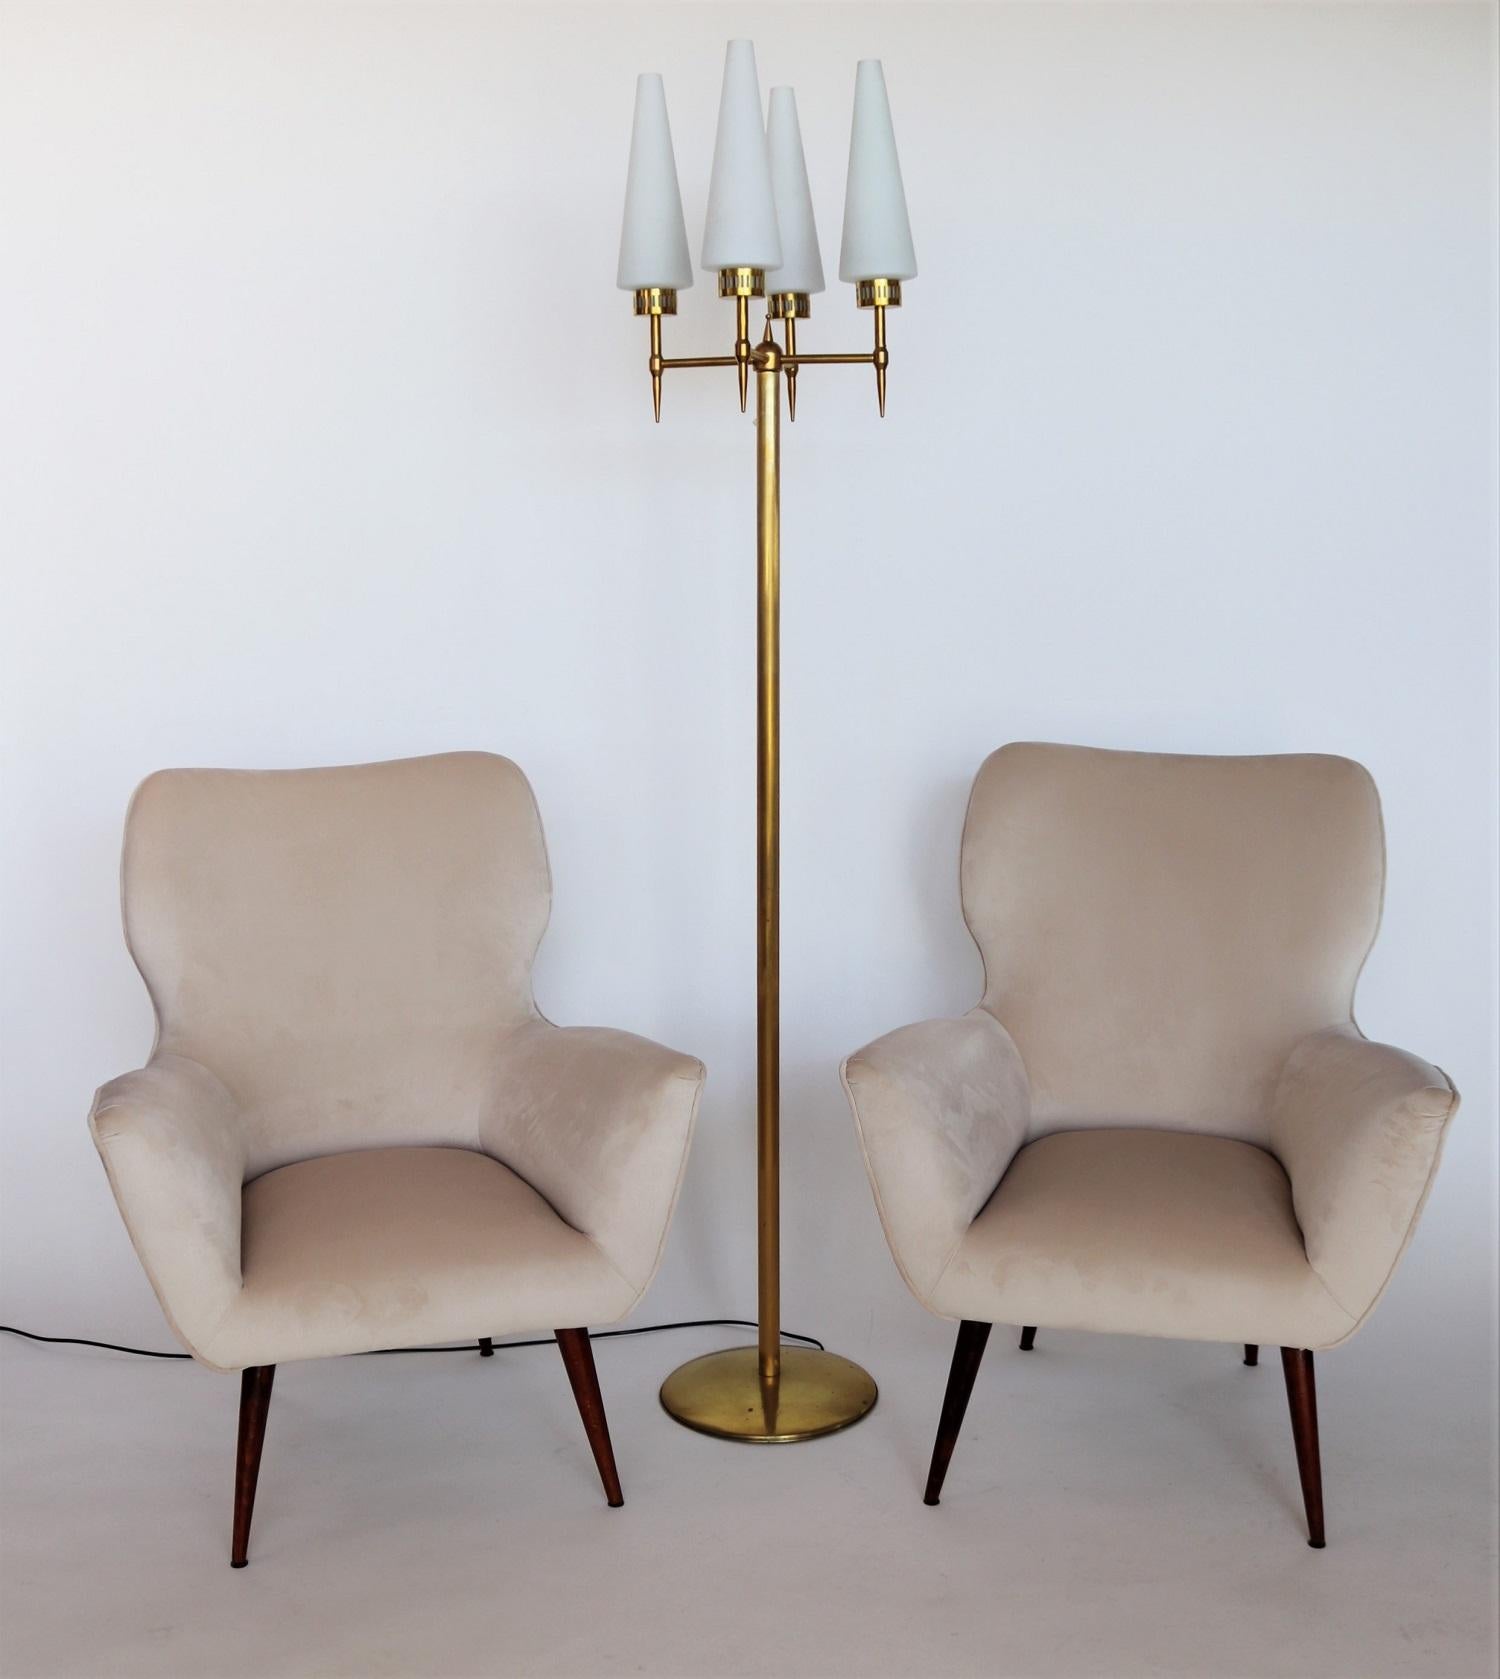 Elegant and beautiful pair of two Italian original midcentury armchairs or lounge chairs from the 1950s with new cream colored soft velvet and wooden mahogany feet. 
Completely restored internally with quality material and outside reupholstered